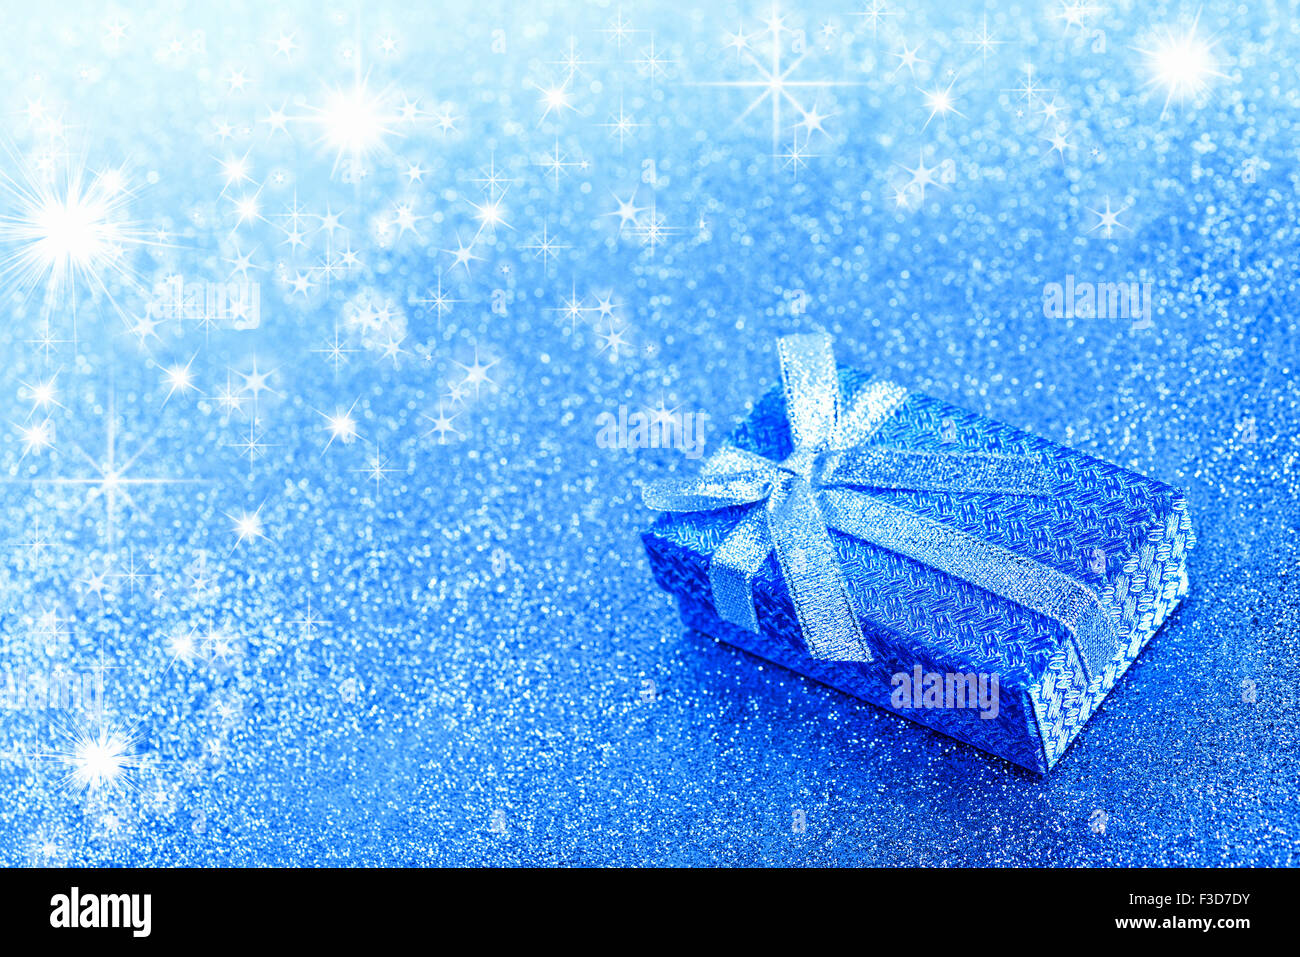 Abstract winter blue christmas background with gift box Stock Photo